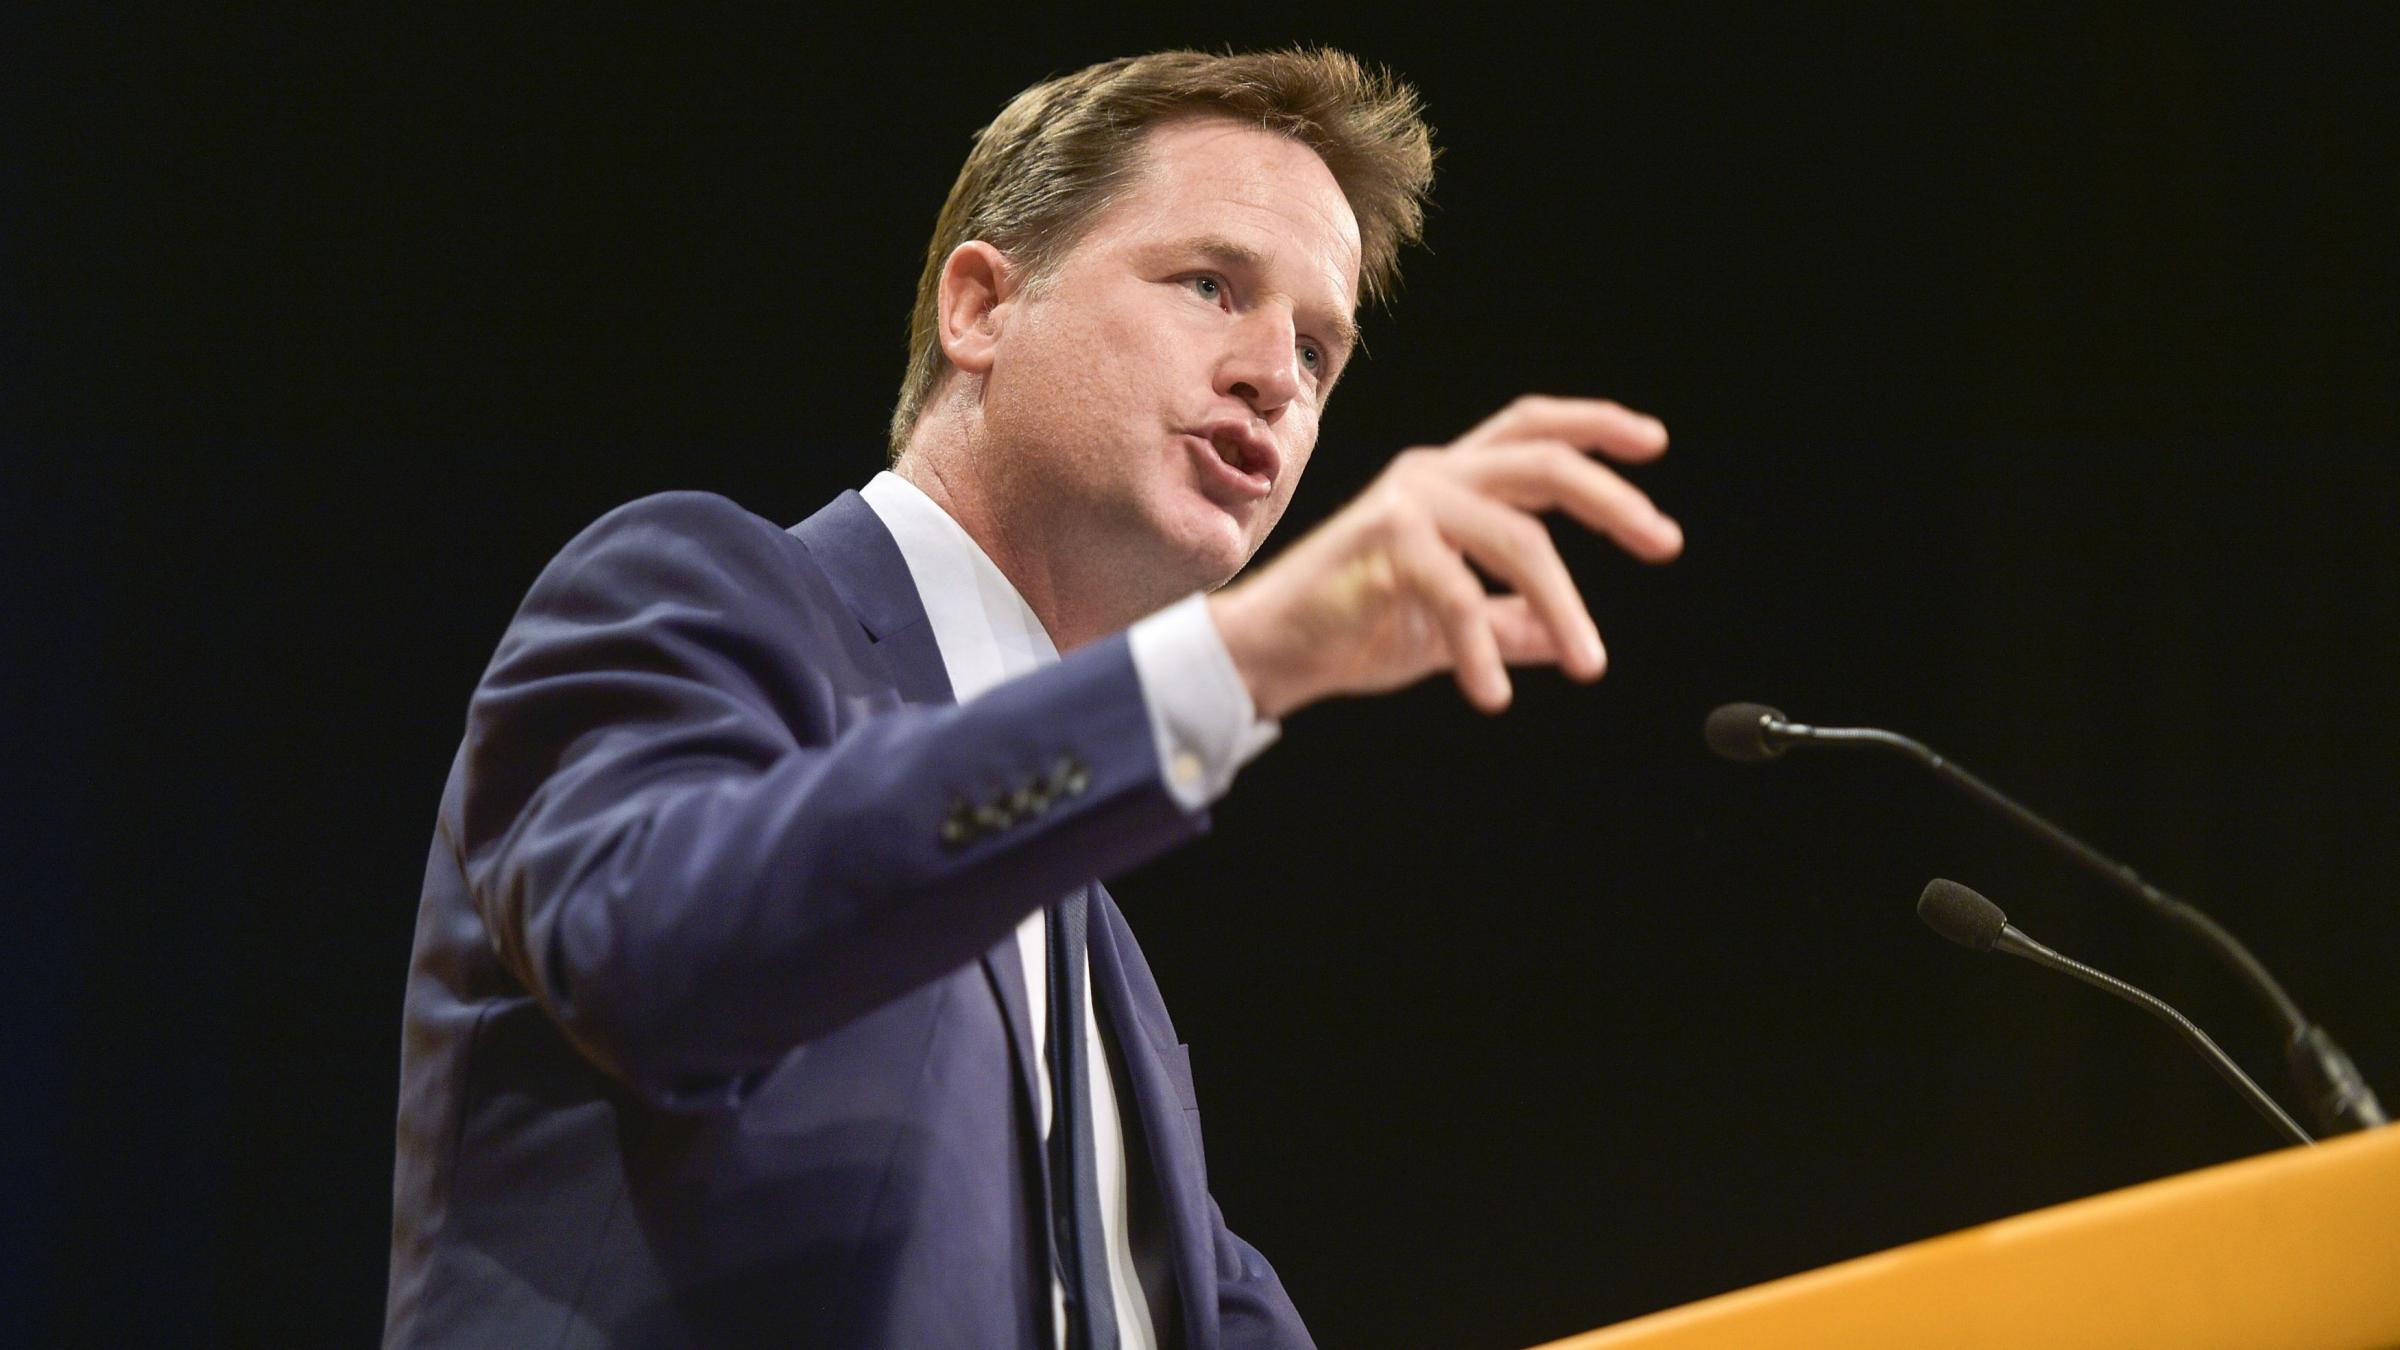 Labour's tuition fees plan 'the wrong choice now' says Clegg - Wiltshire Times